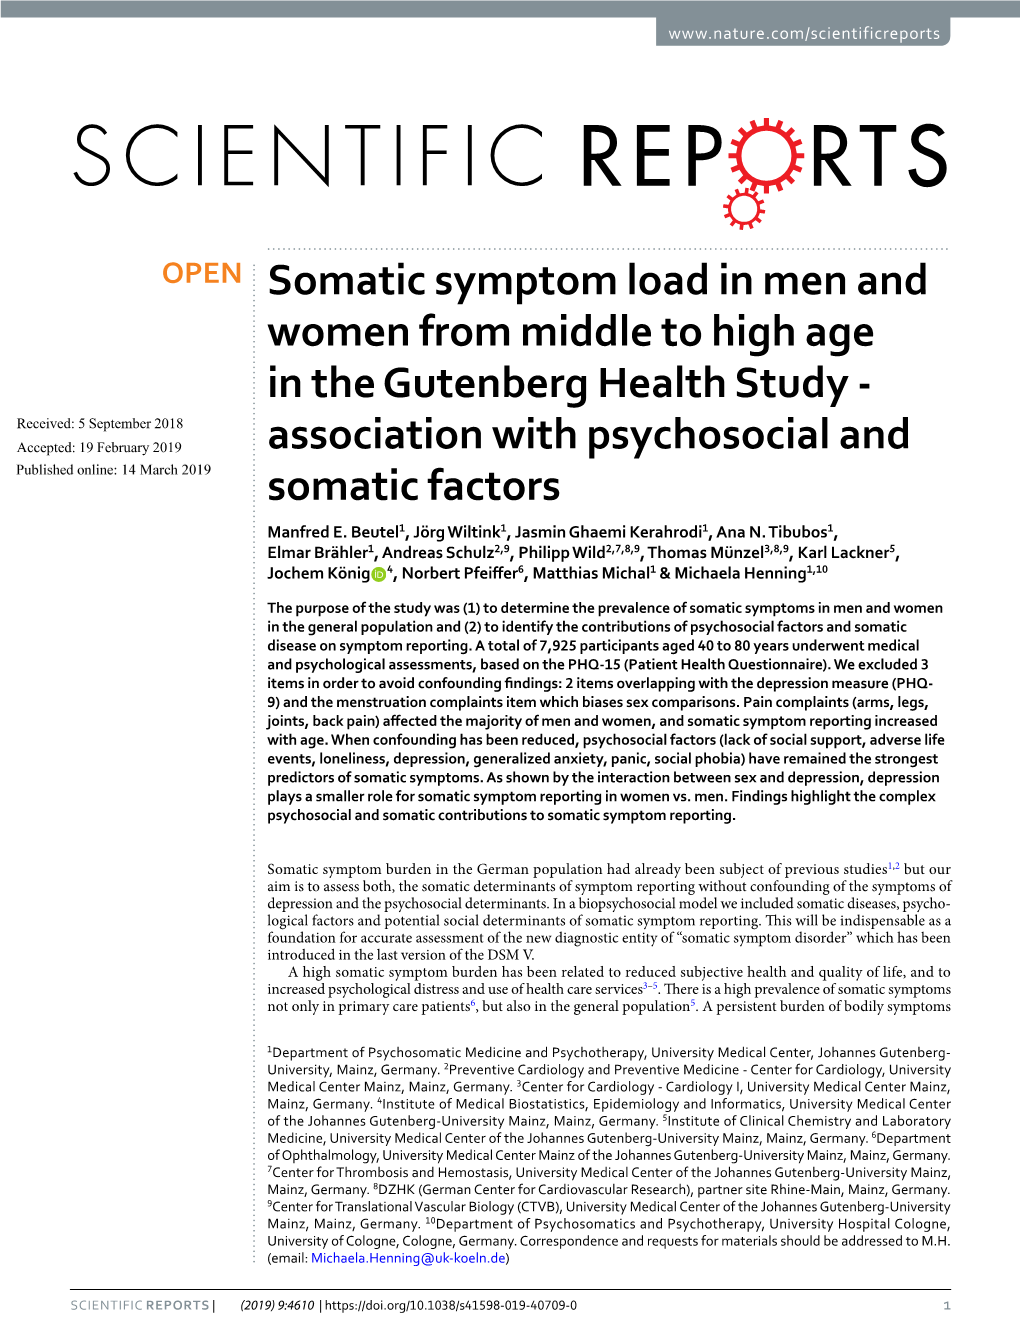 Somatic Symptom Load in Men and Women from Middle to High Age In